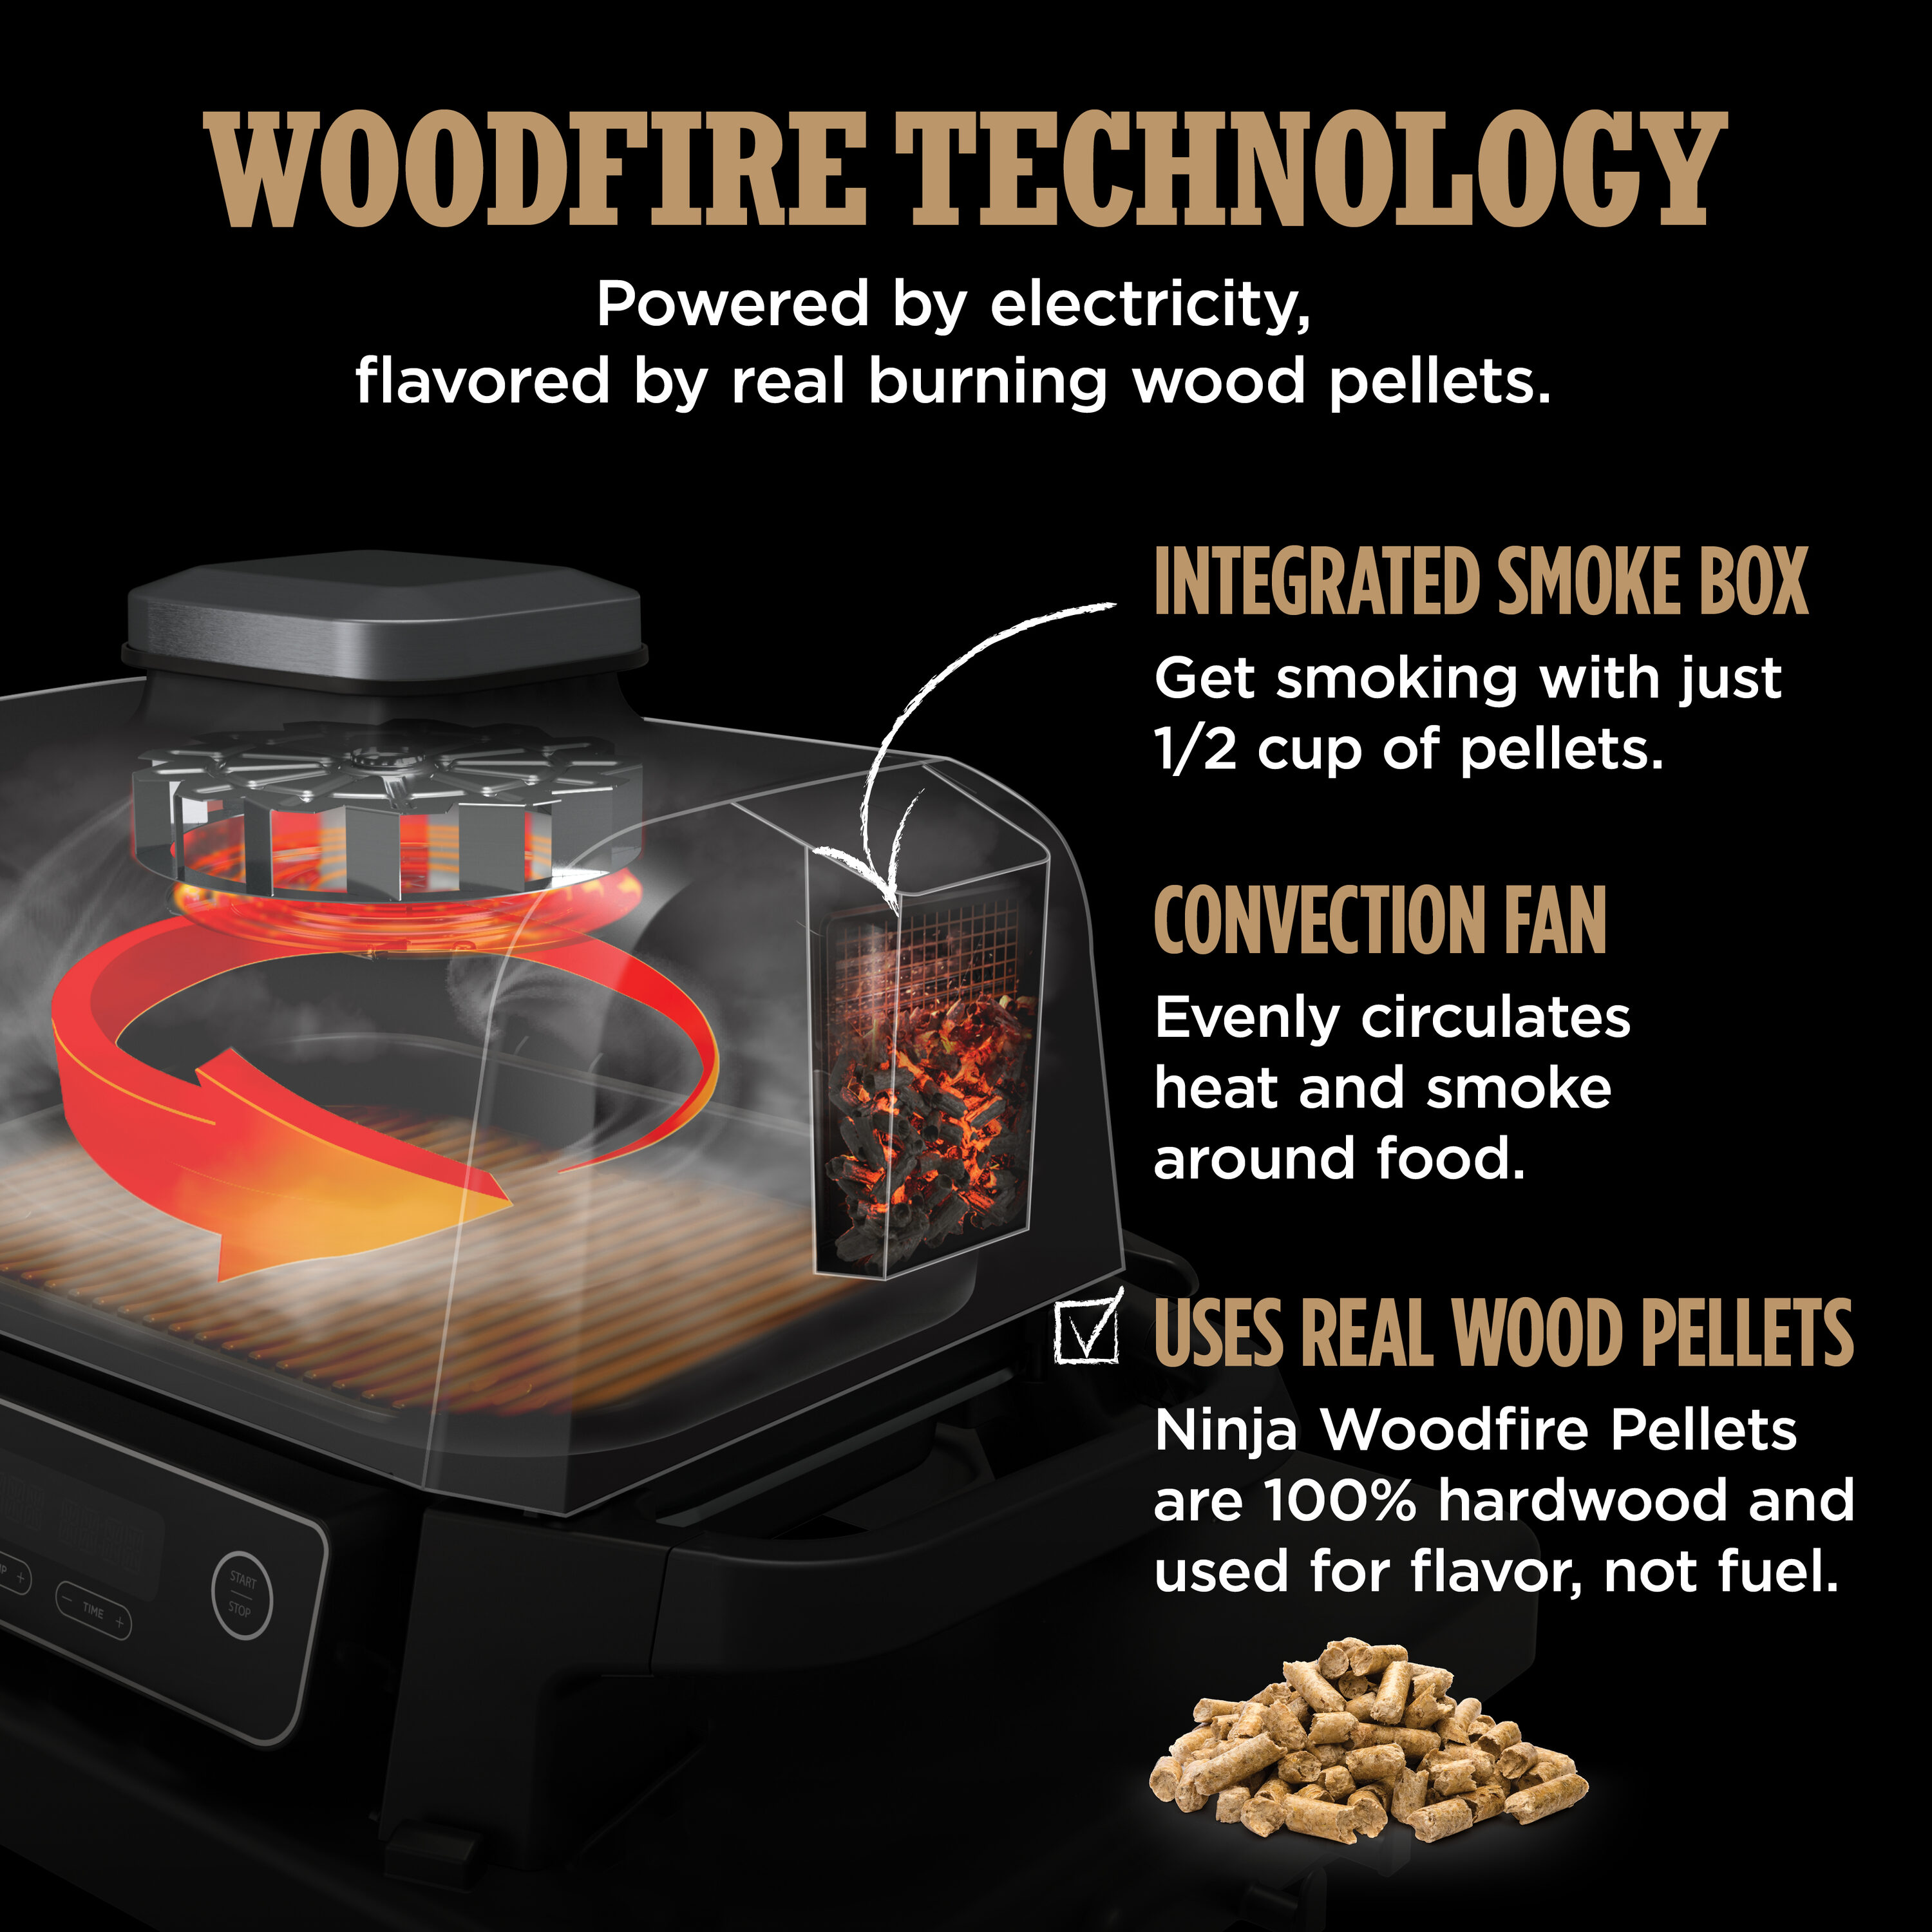 Ninja Woodfire 7-in-1 Electric Outdoor Smoker & AirFry Grill 